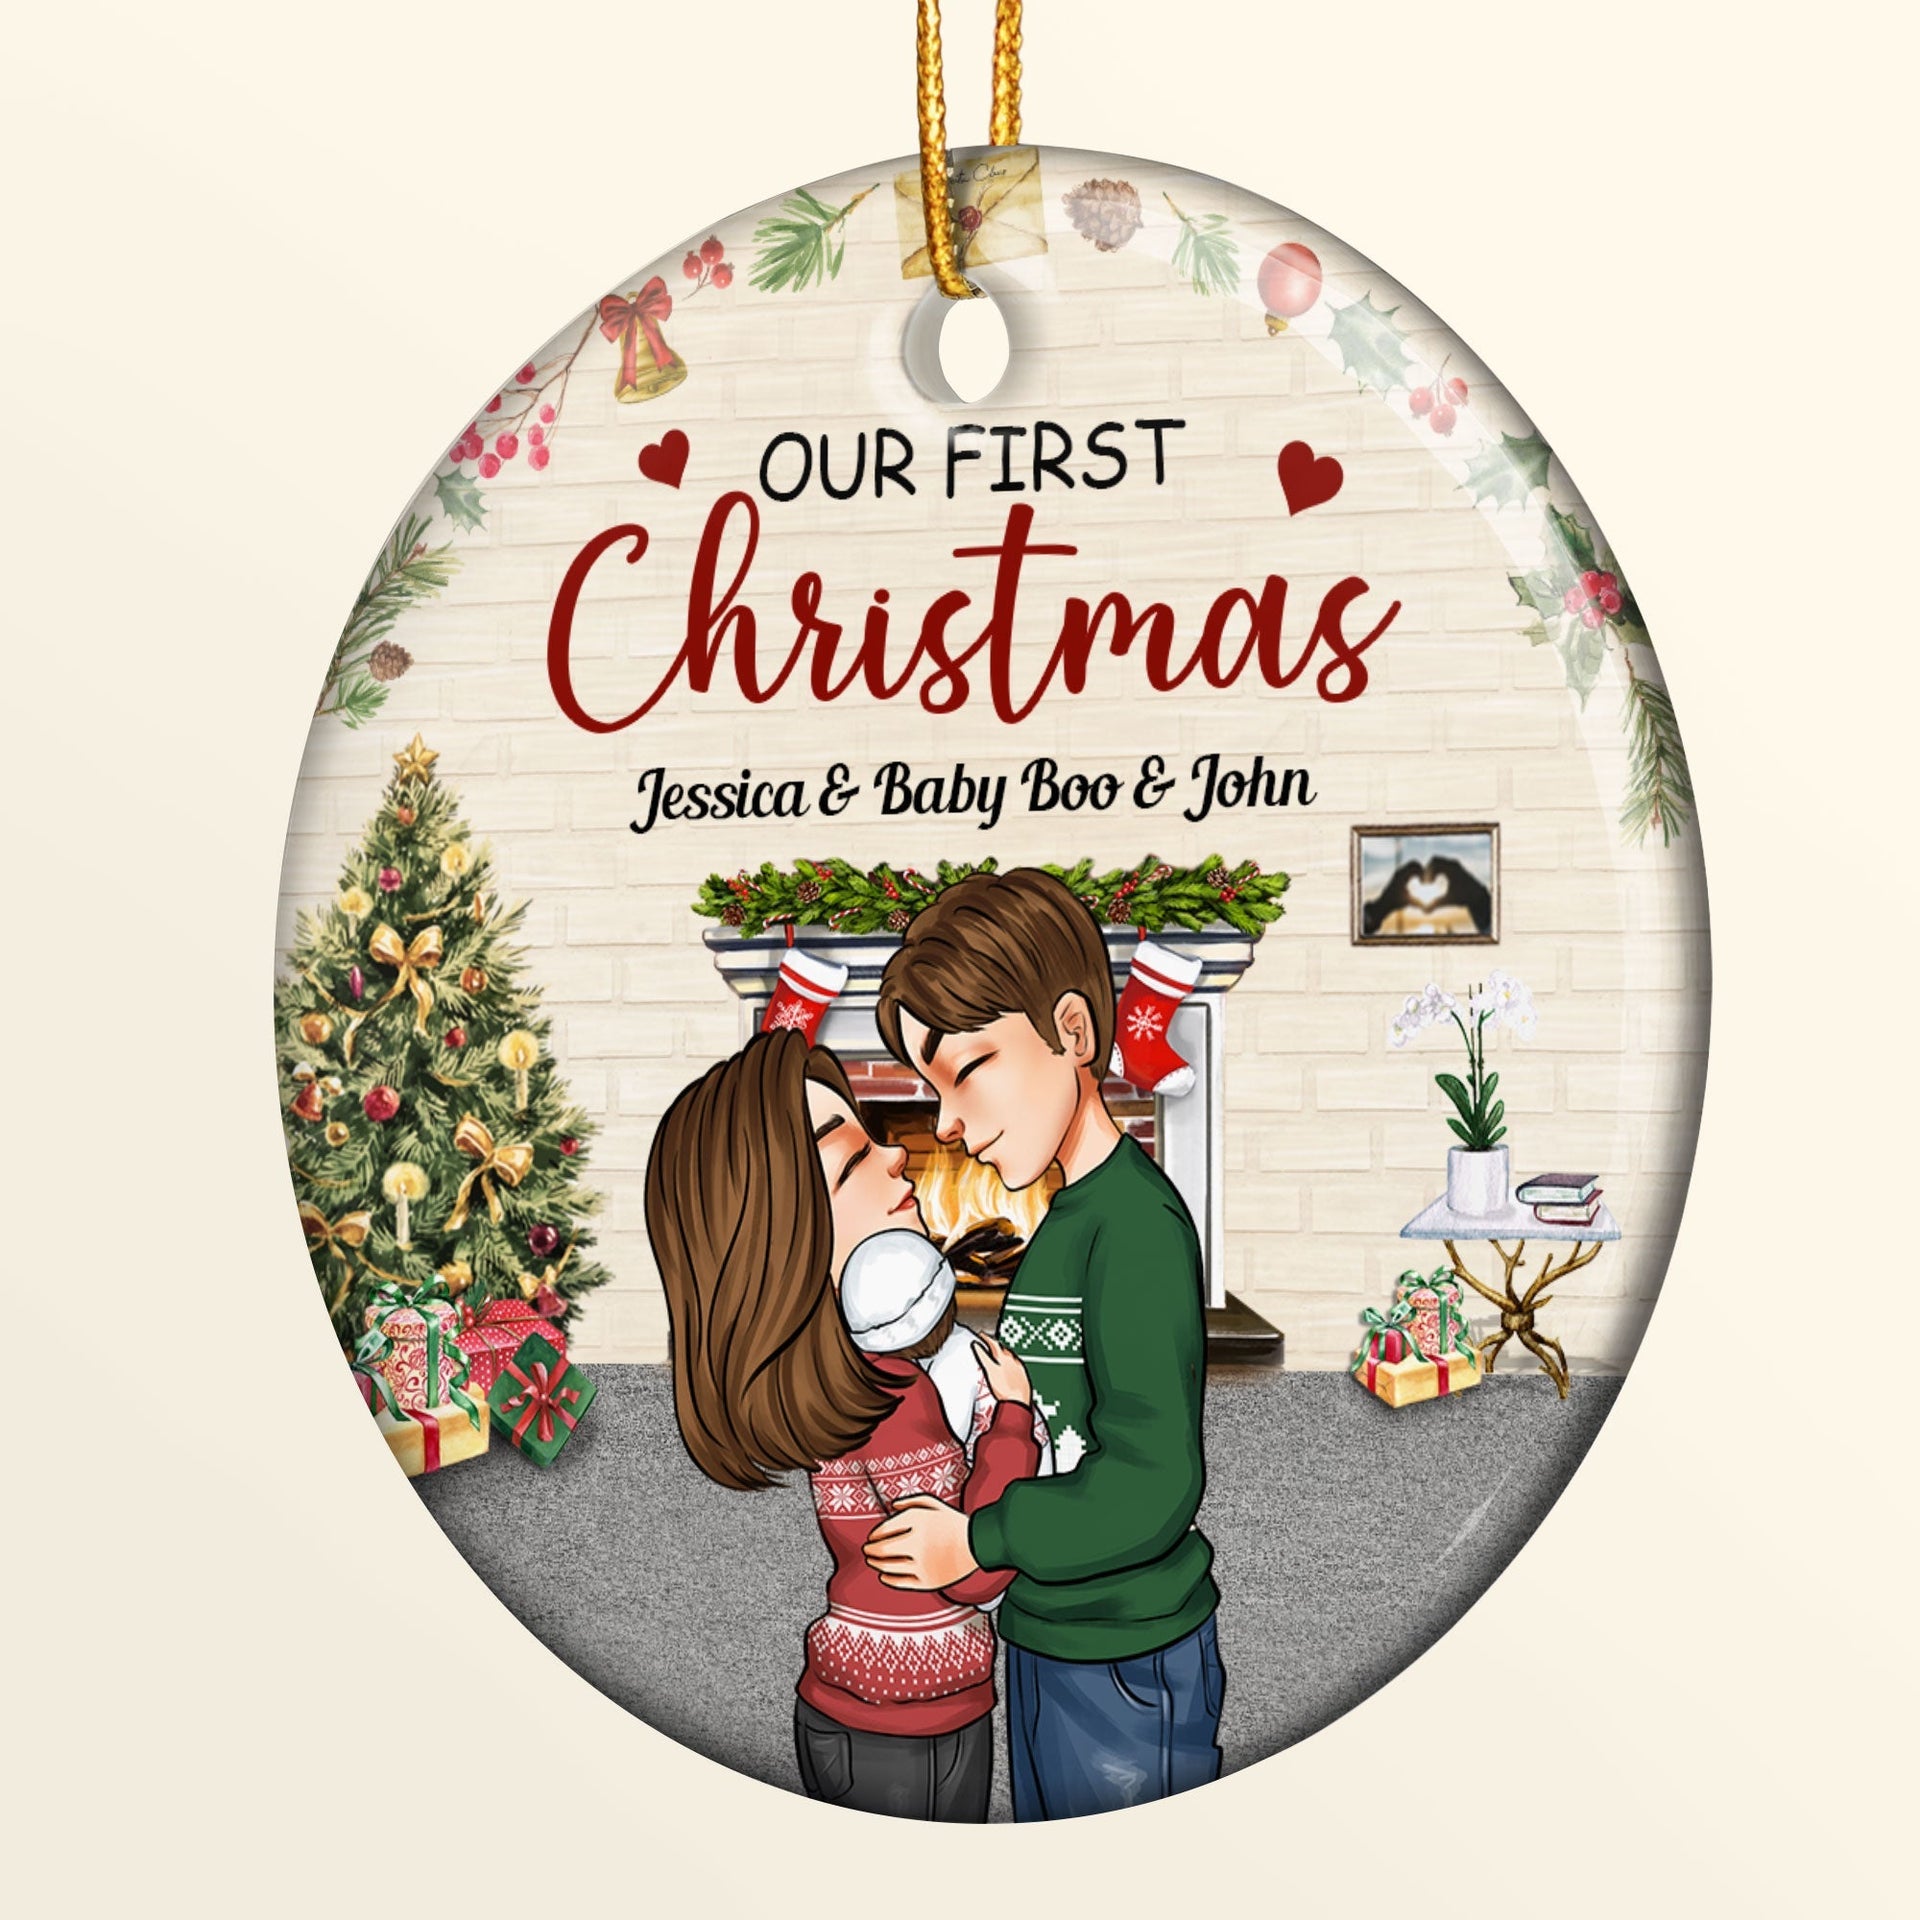 First Christmas - Personalized Ceramic Ornament - Christmas Gift For Spouse, Lover, Husband, Wife, Newly Wed, Newborn Baby